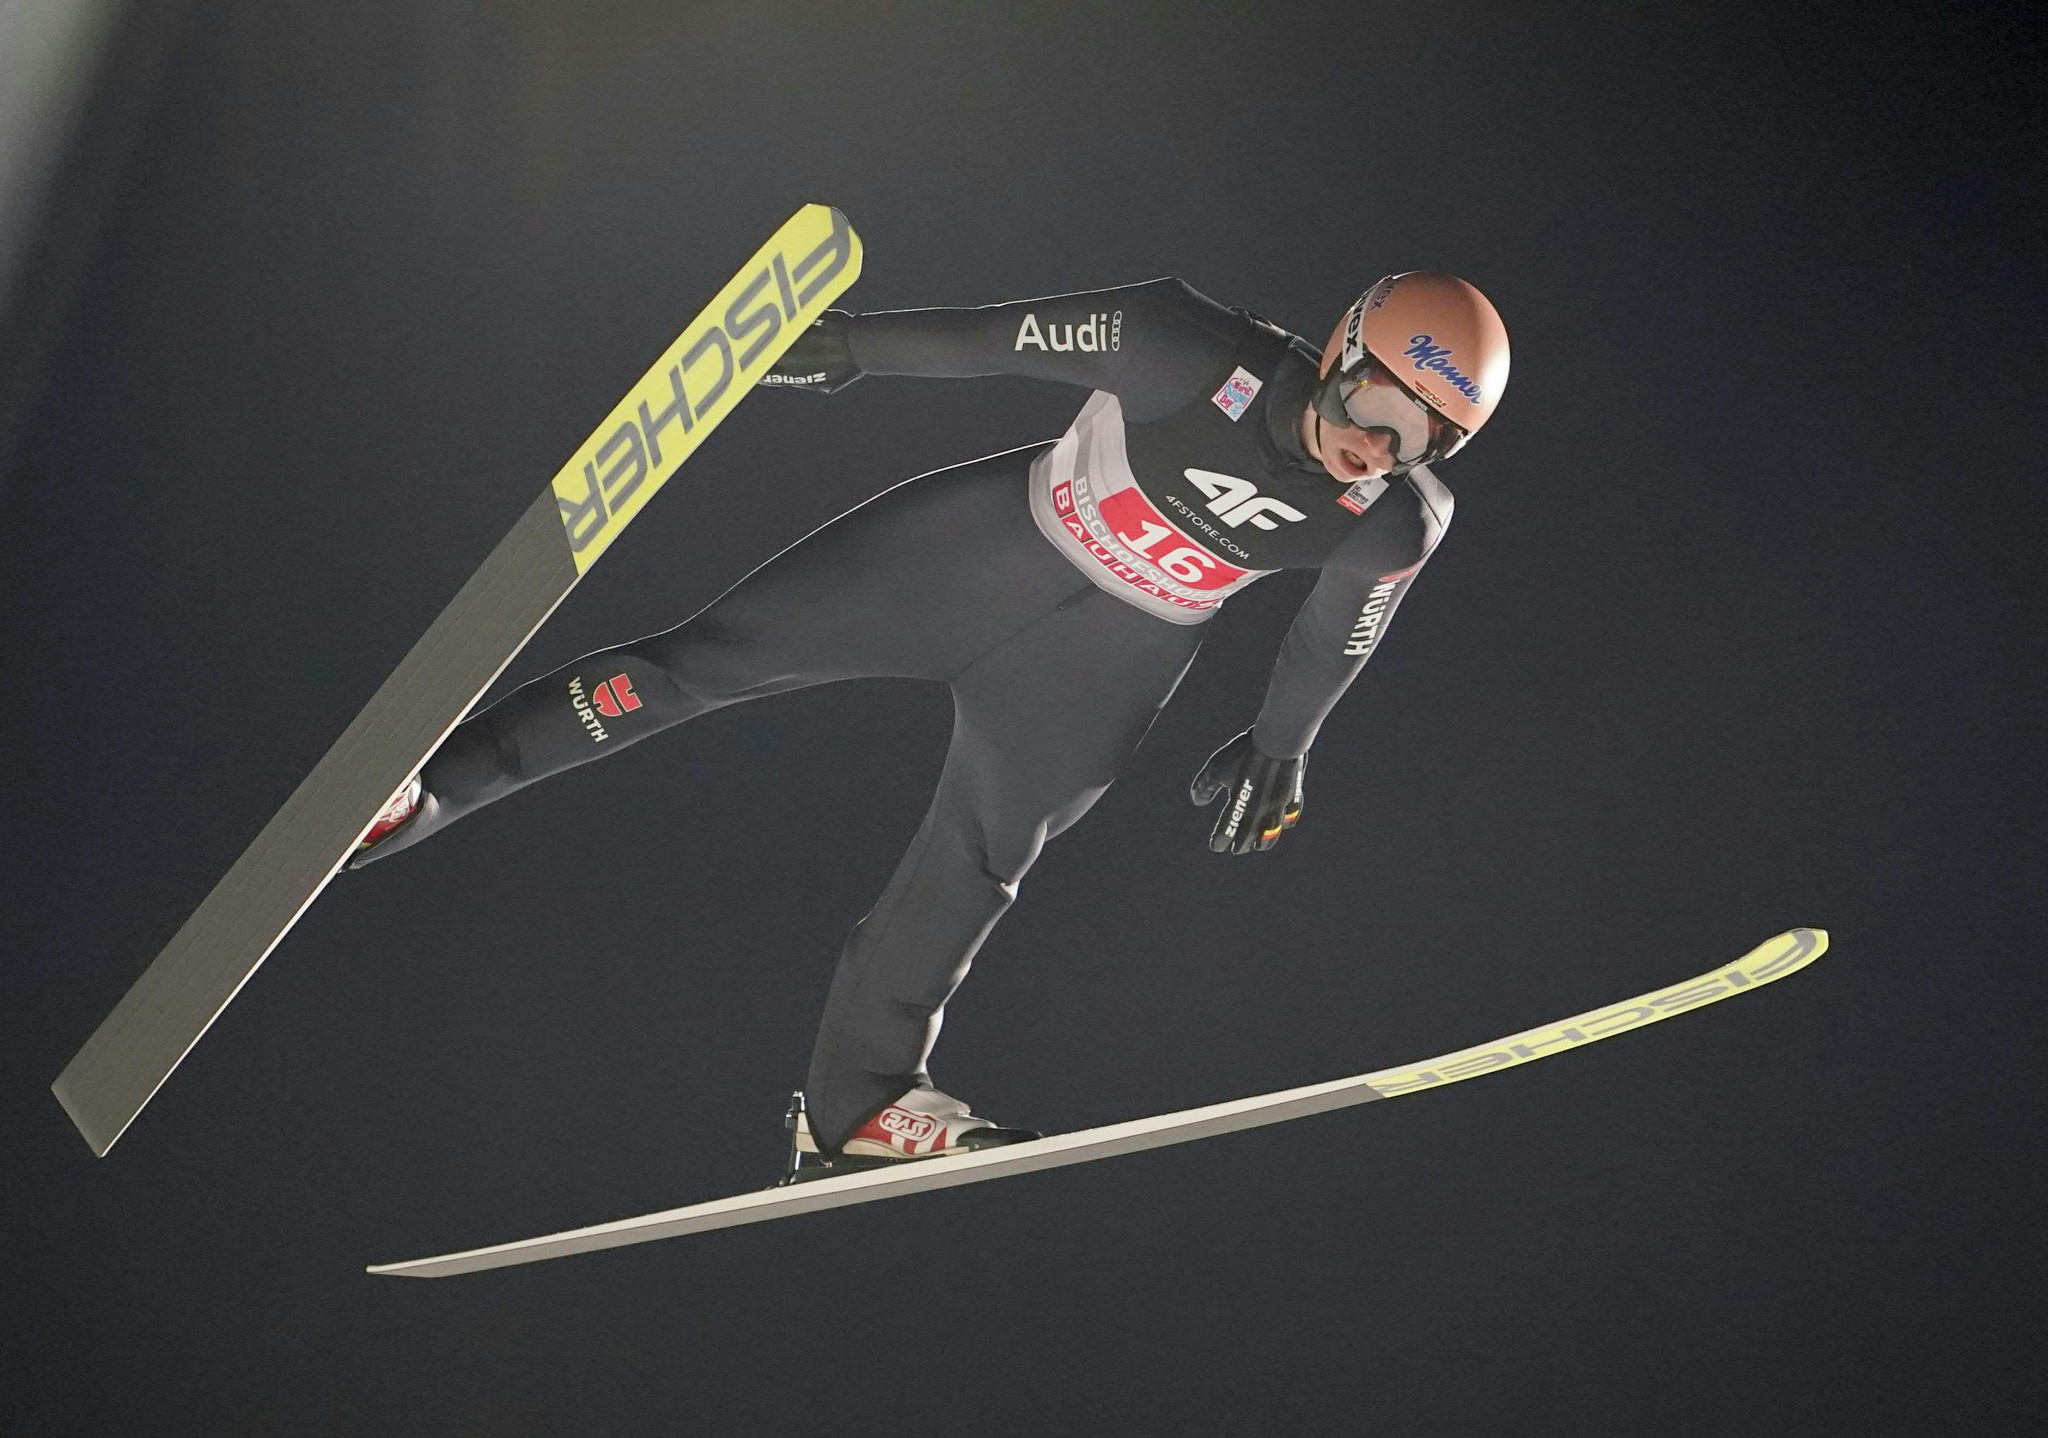 Germany's Karl Geiger is flying high going into his home FIS Ski Jumping World Cup in Titisee-Neustadt ©Getty Images